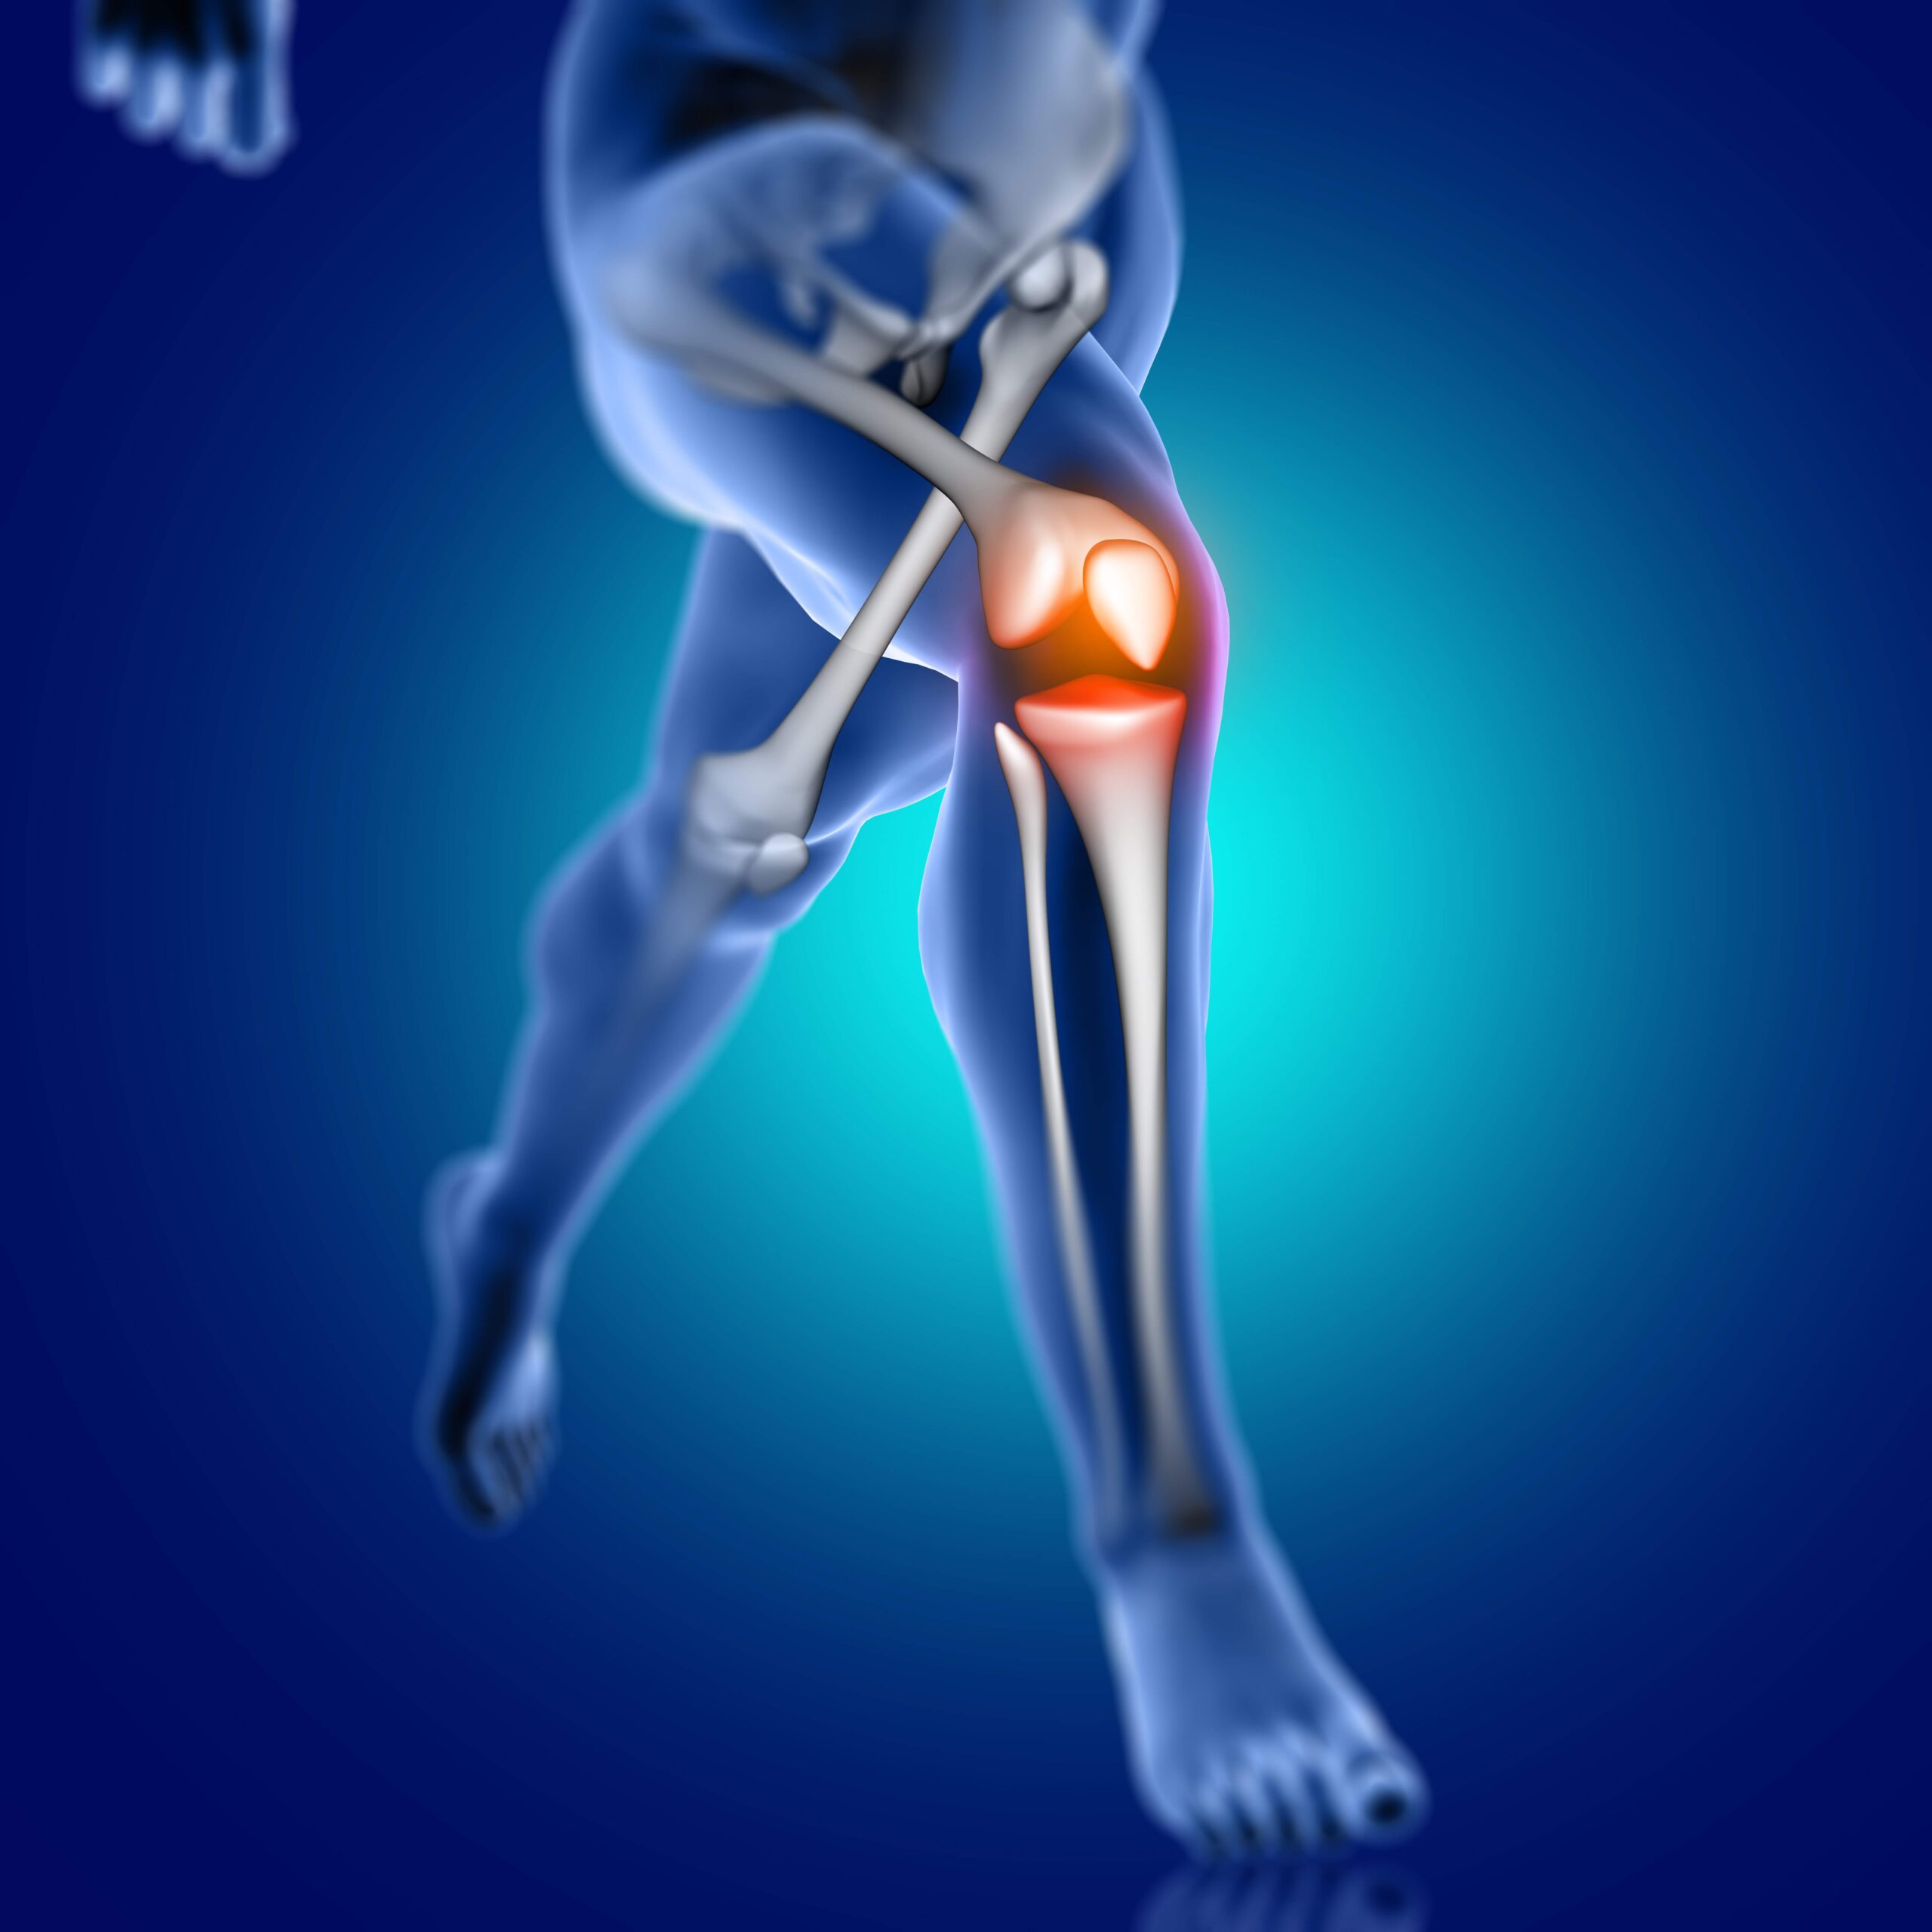 If the knee pop and the pain is coming from one area in the joint then it needs to be checked by a health expert